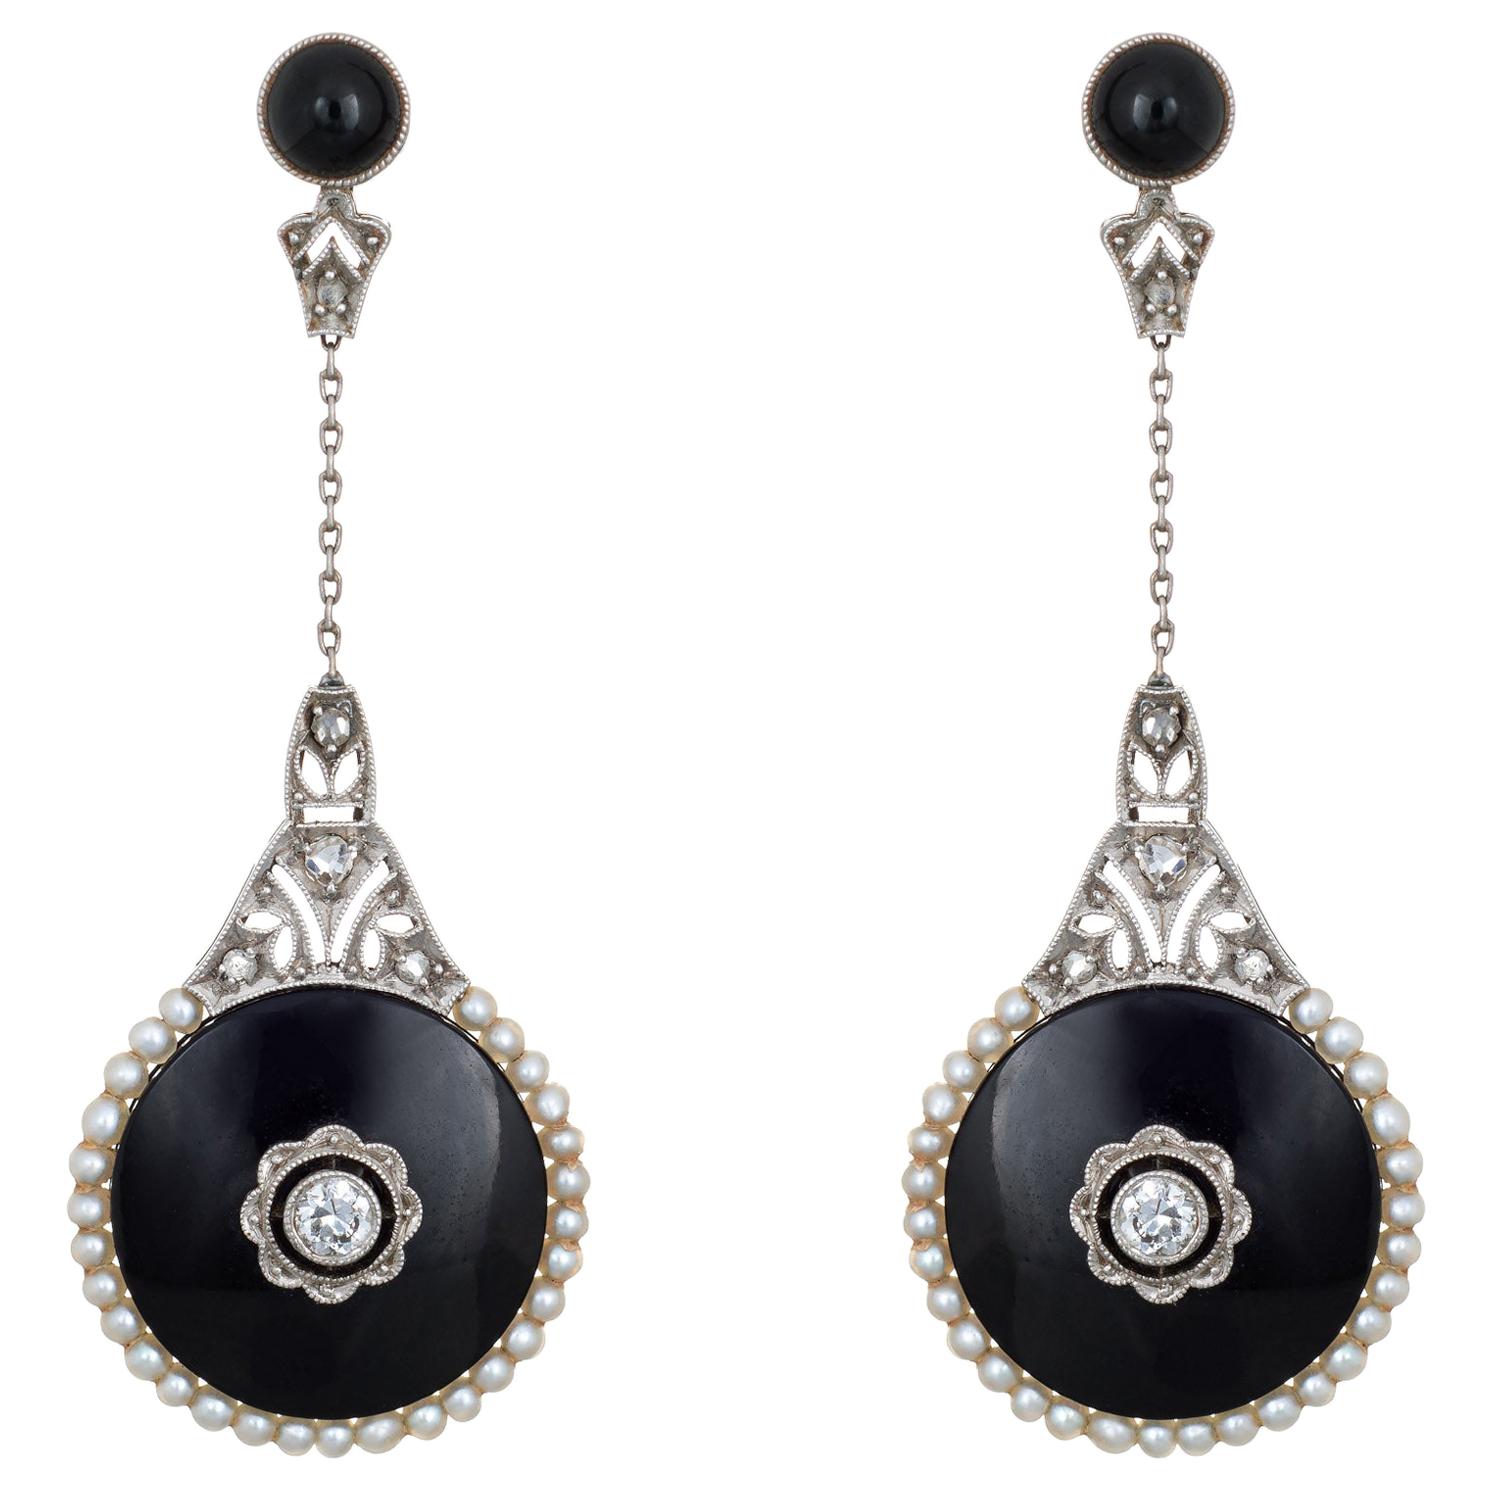 Belle Epoque Earrings Antique Diamond Onyx Pearl Drops 18k Gold Platinum French